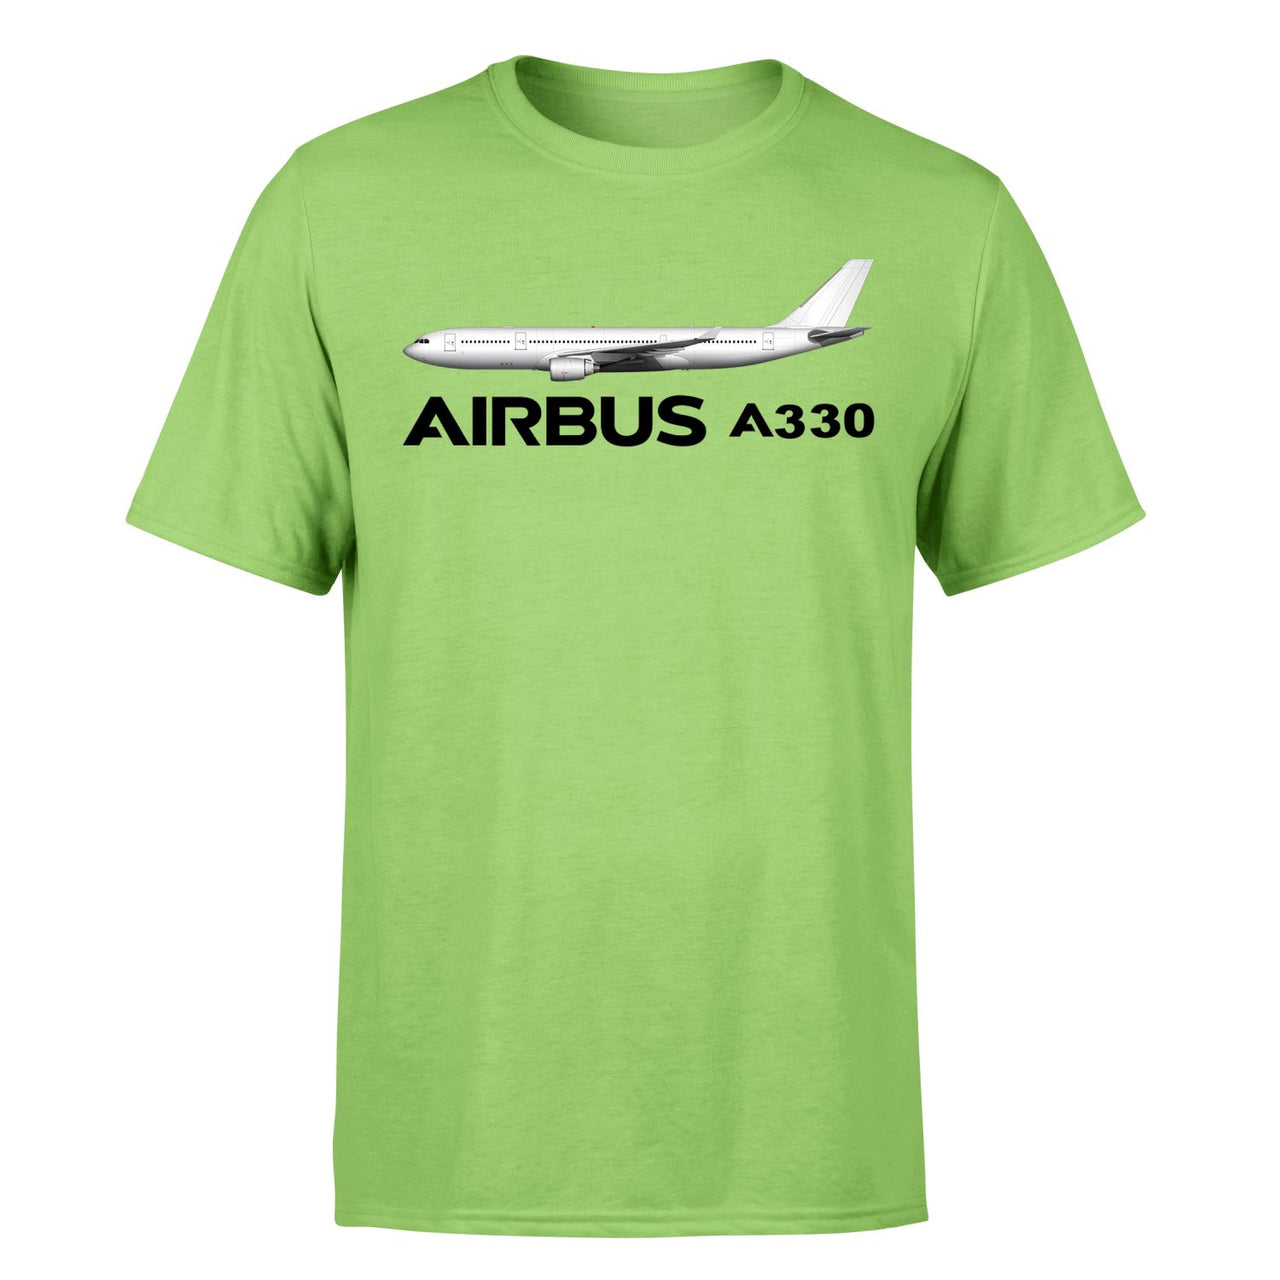 The Airbus A330 Designed T-Shirts